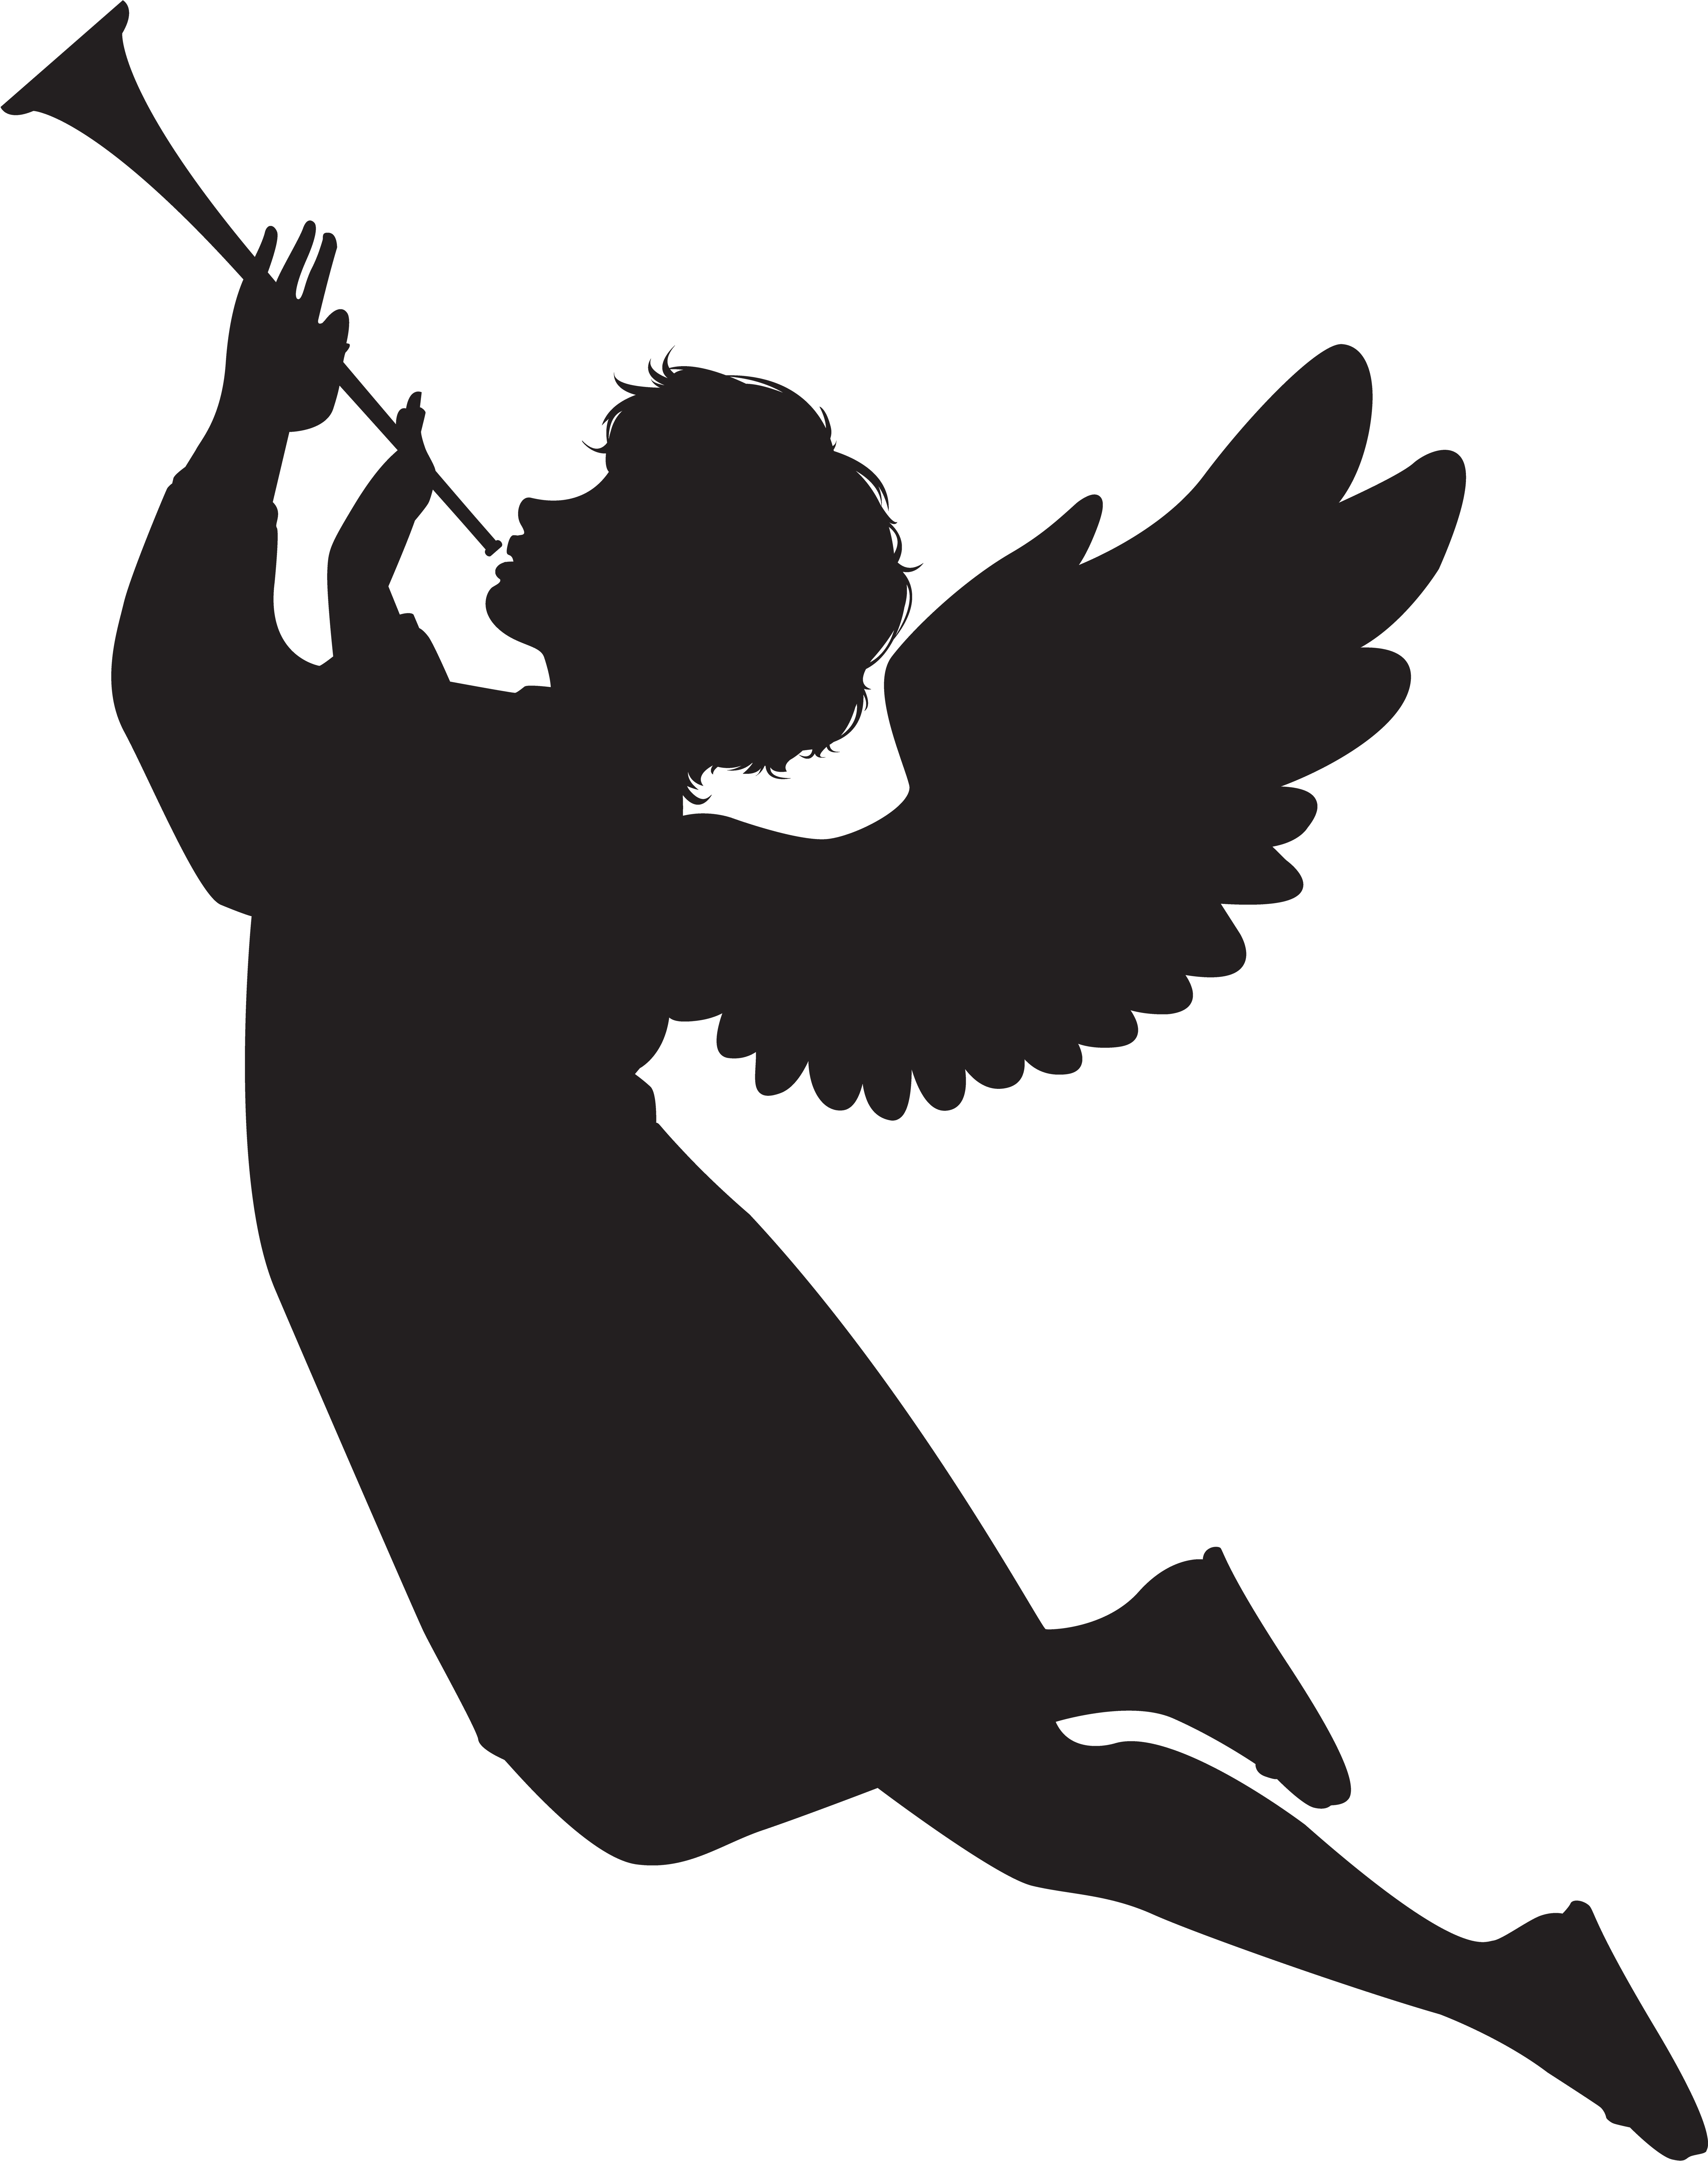 Angel With Fanfare Silhouette Png Clip Art Imageu200b - Angel With Fanfare Silhouette Png Clip Art Imageu200b (5581x7000)